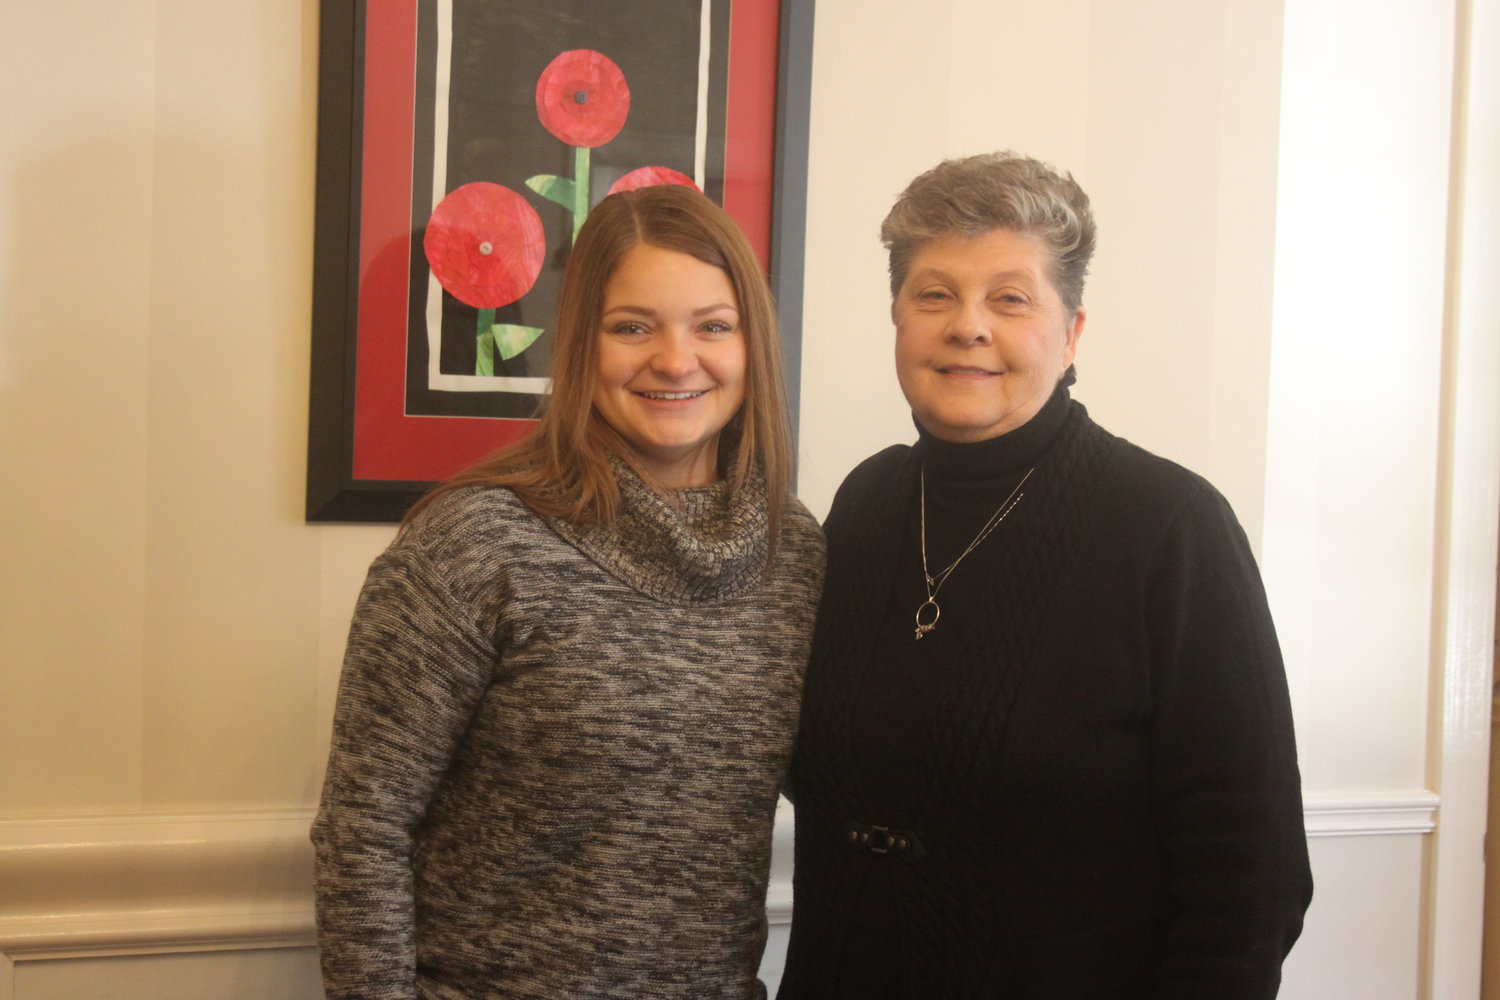 Schlanker Funeral Home director Carol Mills, right, poses with Irelynn Kobusch at the funeral home on Jan. 27. Mills plans to retire as director in February, while Kobusch will take over duties.